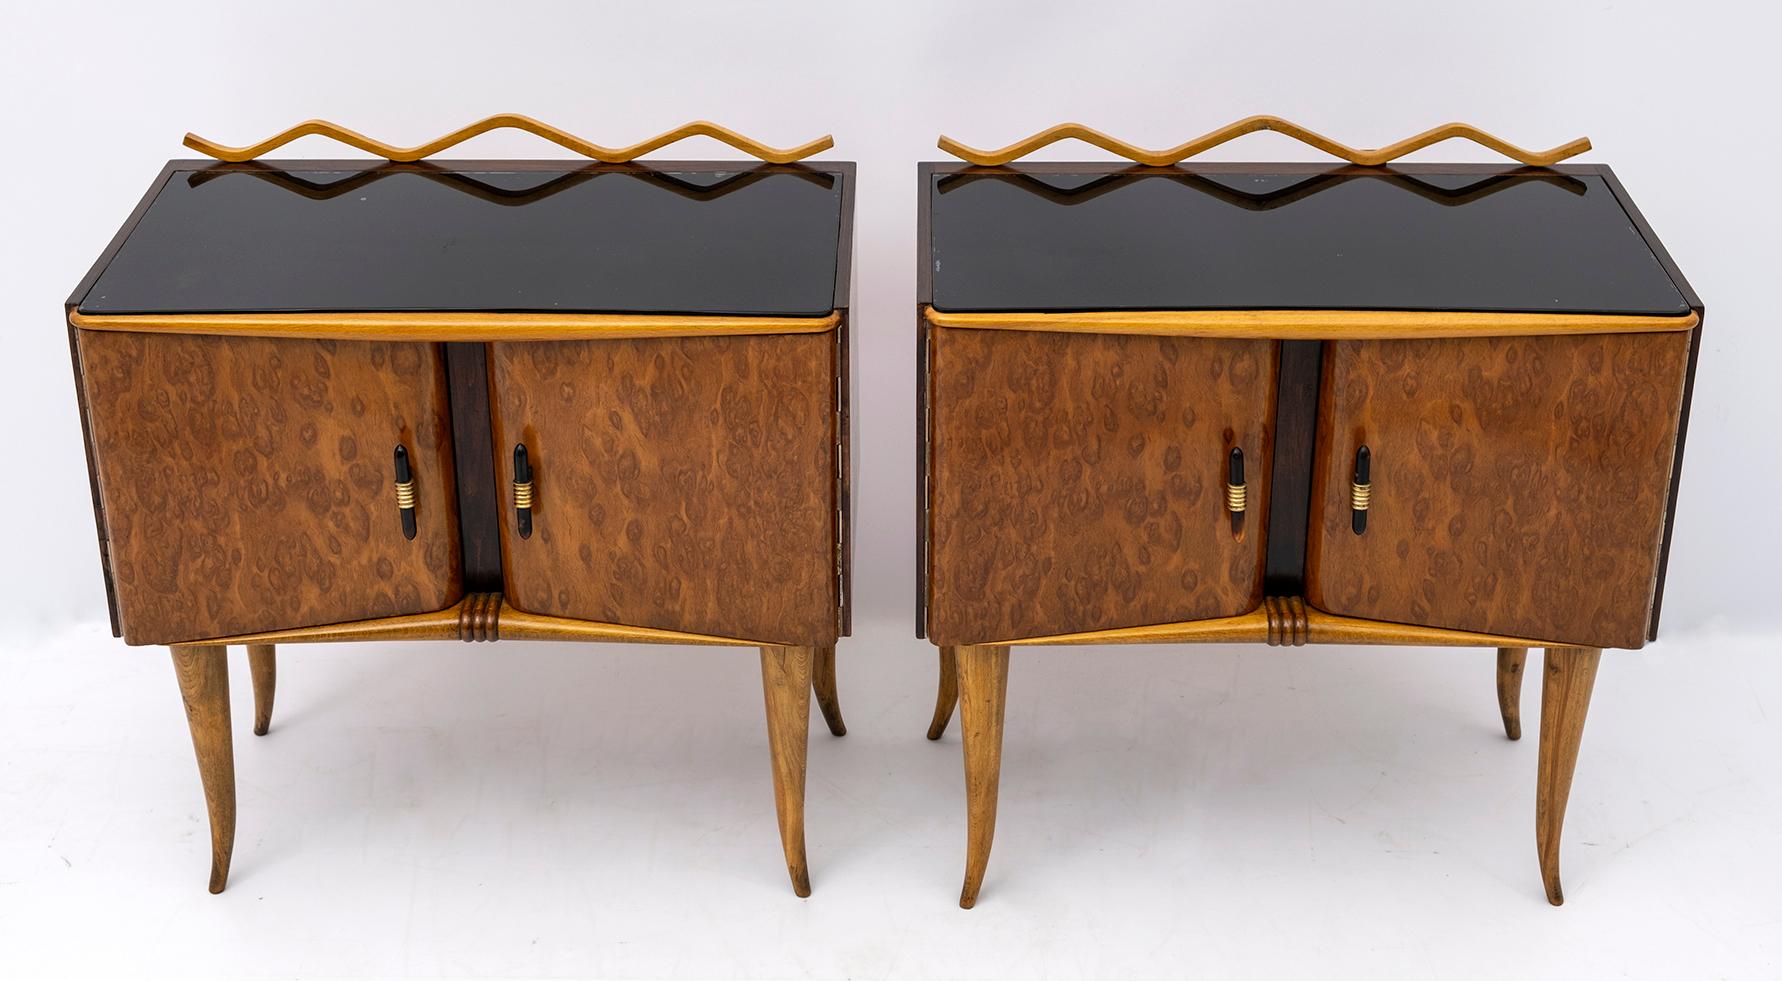 This pair of bedside tables was produced in Italy in the 1920s, Art Deco period. They were made of maple wood, ash burl and walnut, the top is in black painted glass, the structure is in poplar, the handles in brass and bakelite. They have been